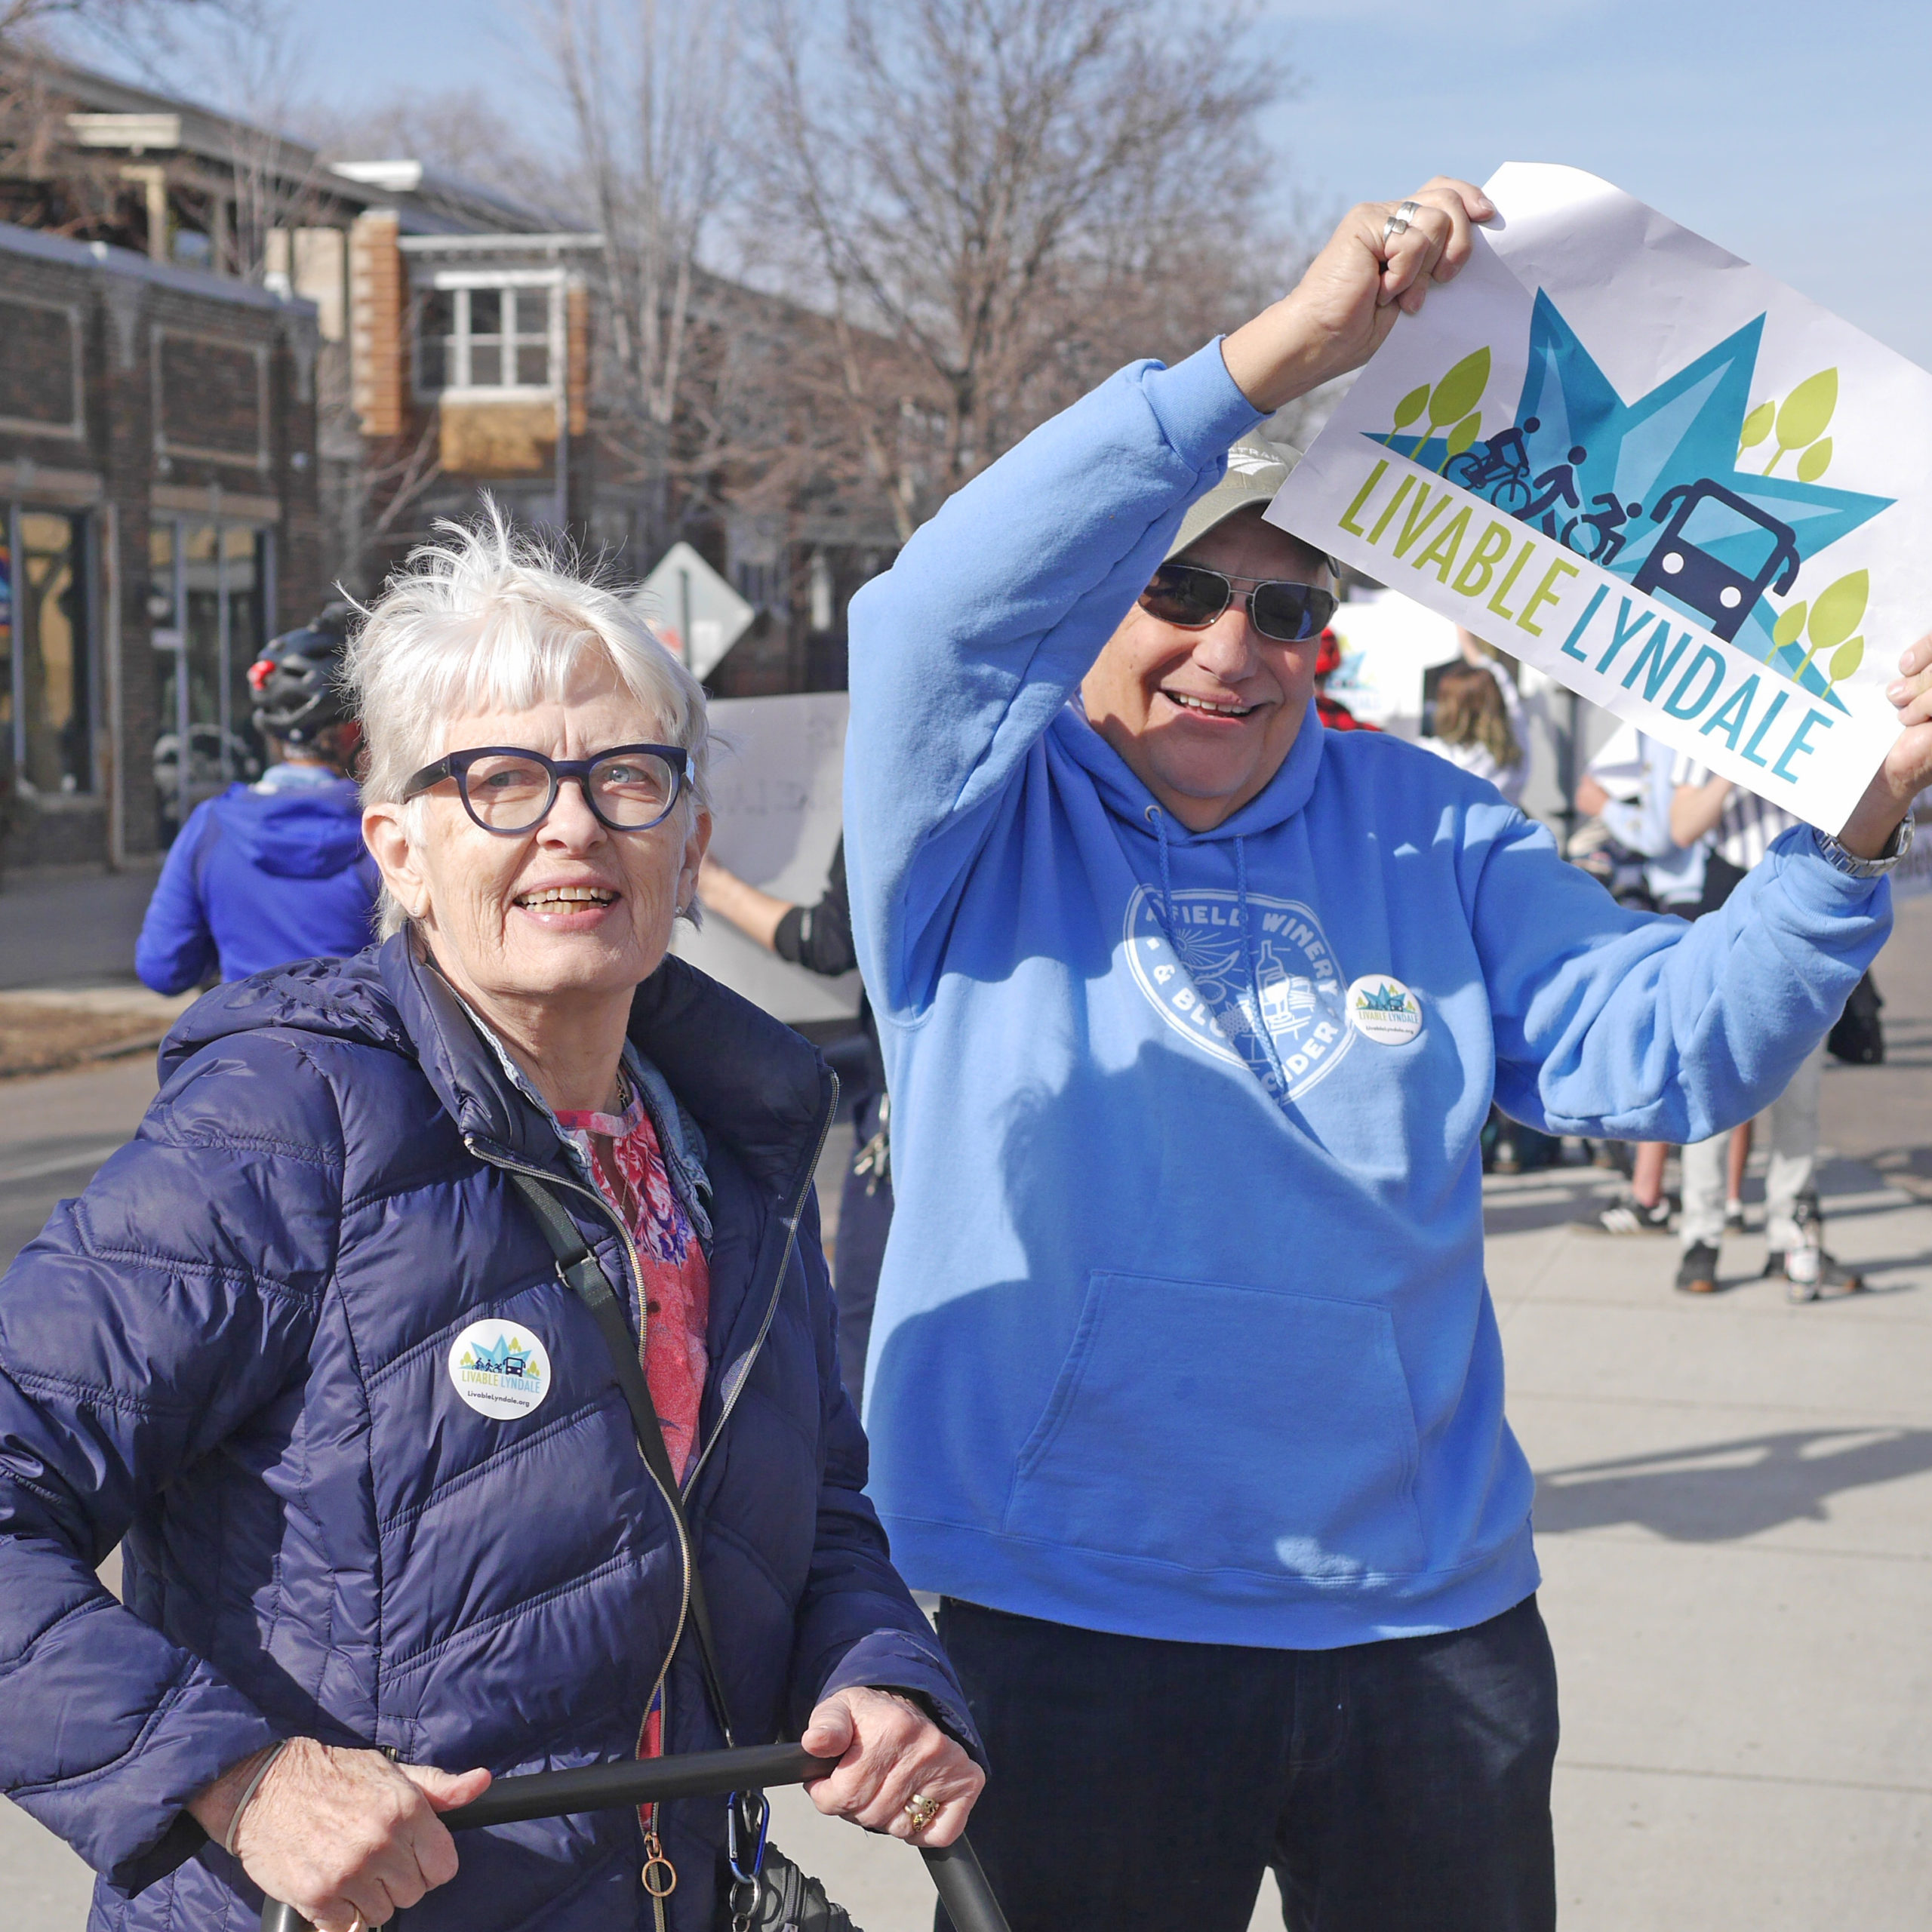 Two elder community members wearing Livable Lyndale buttons and holding a Livable Lyndale sign at the rally in Minneapolis.